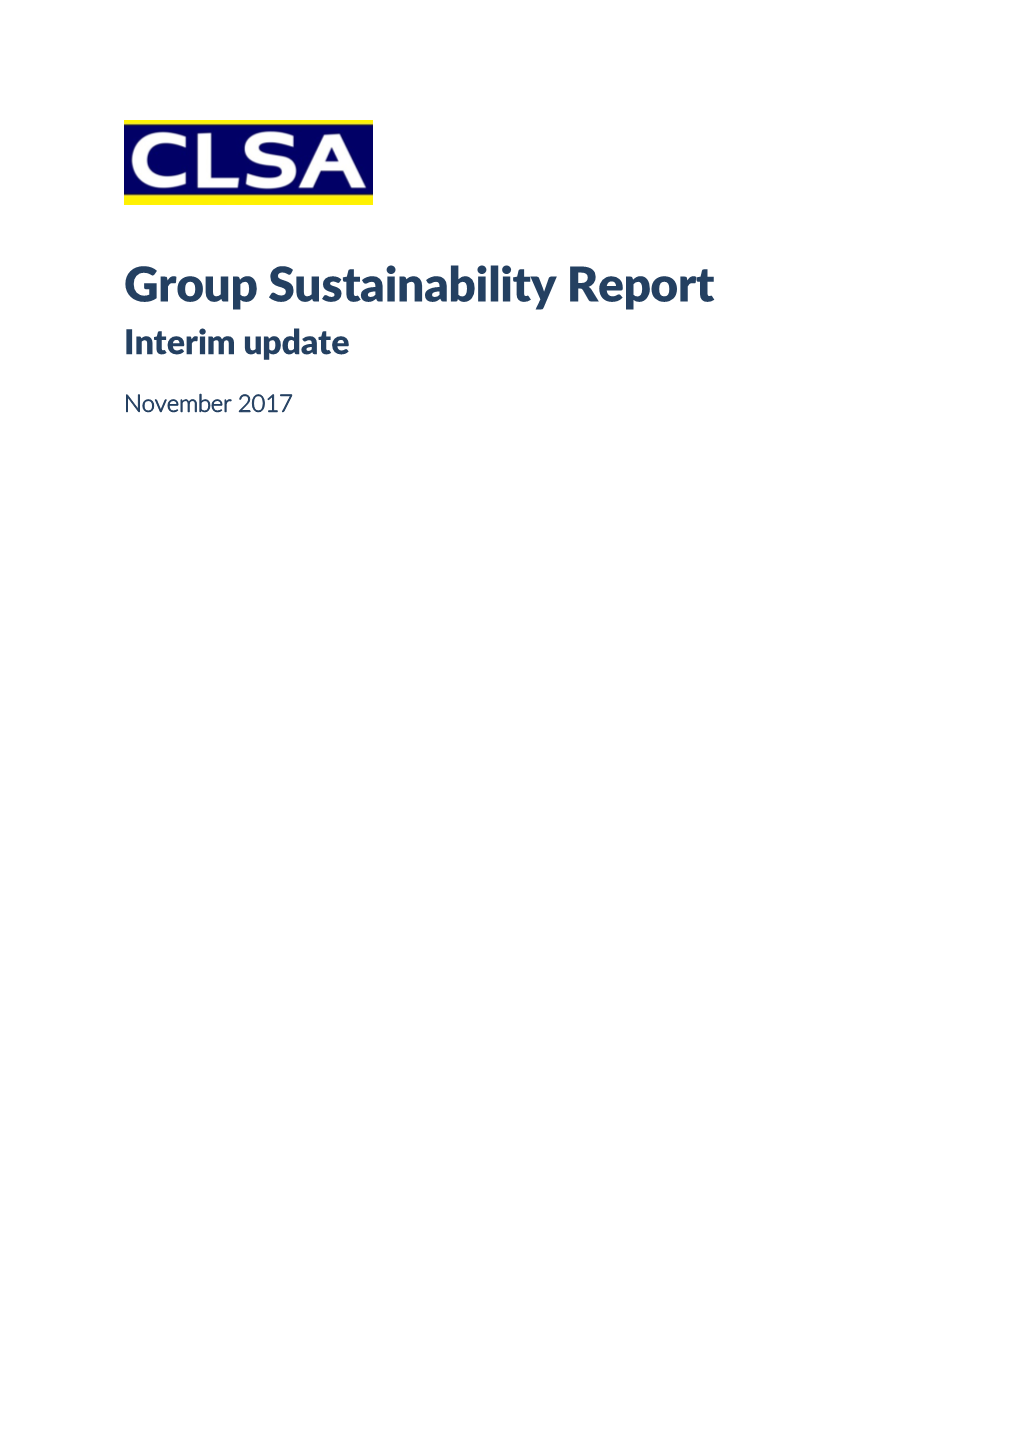 CLSA Sustainability Report 2017